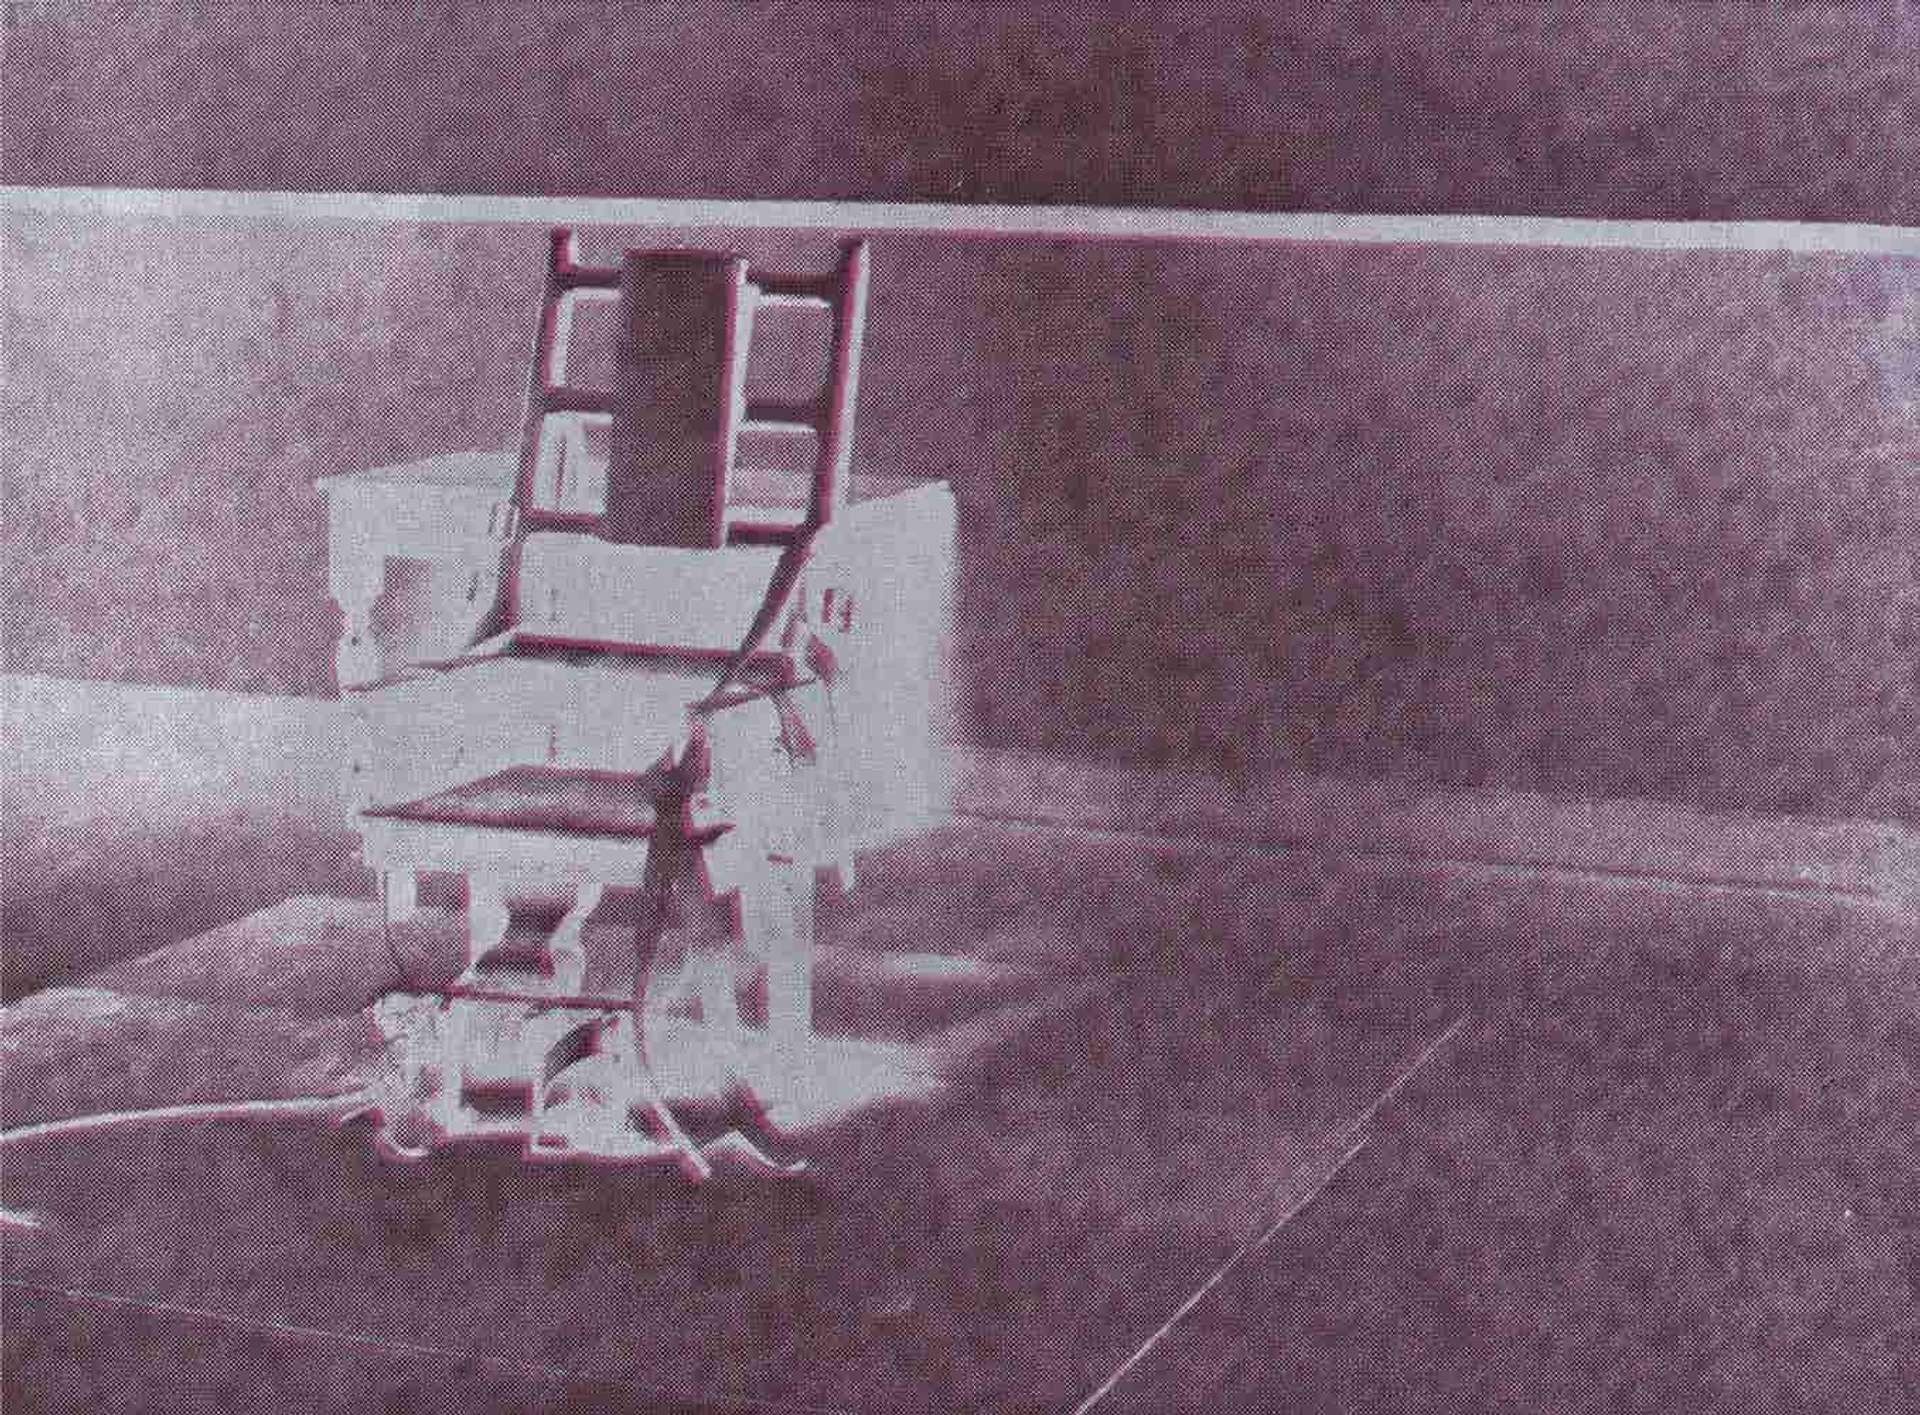 10 Facts About Andy Warhol's Electric Chair